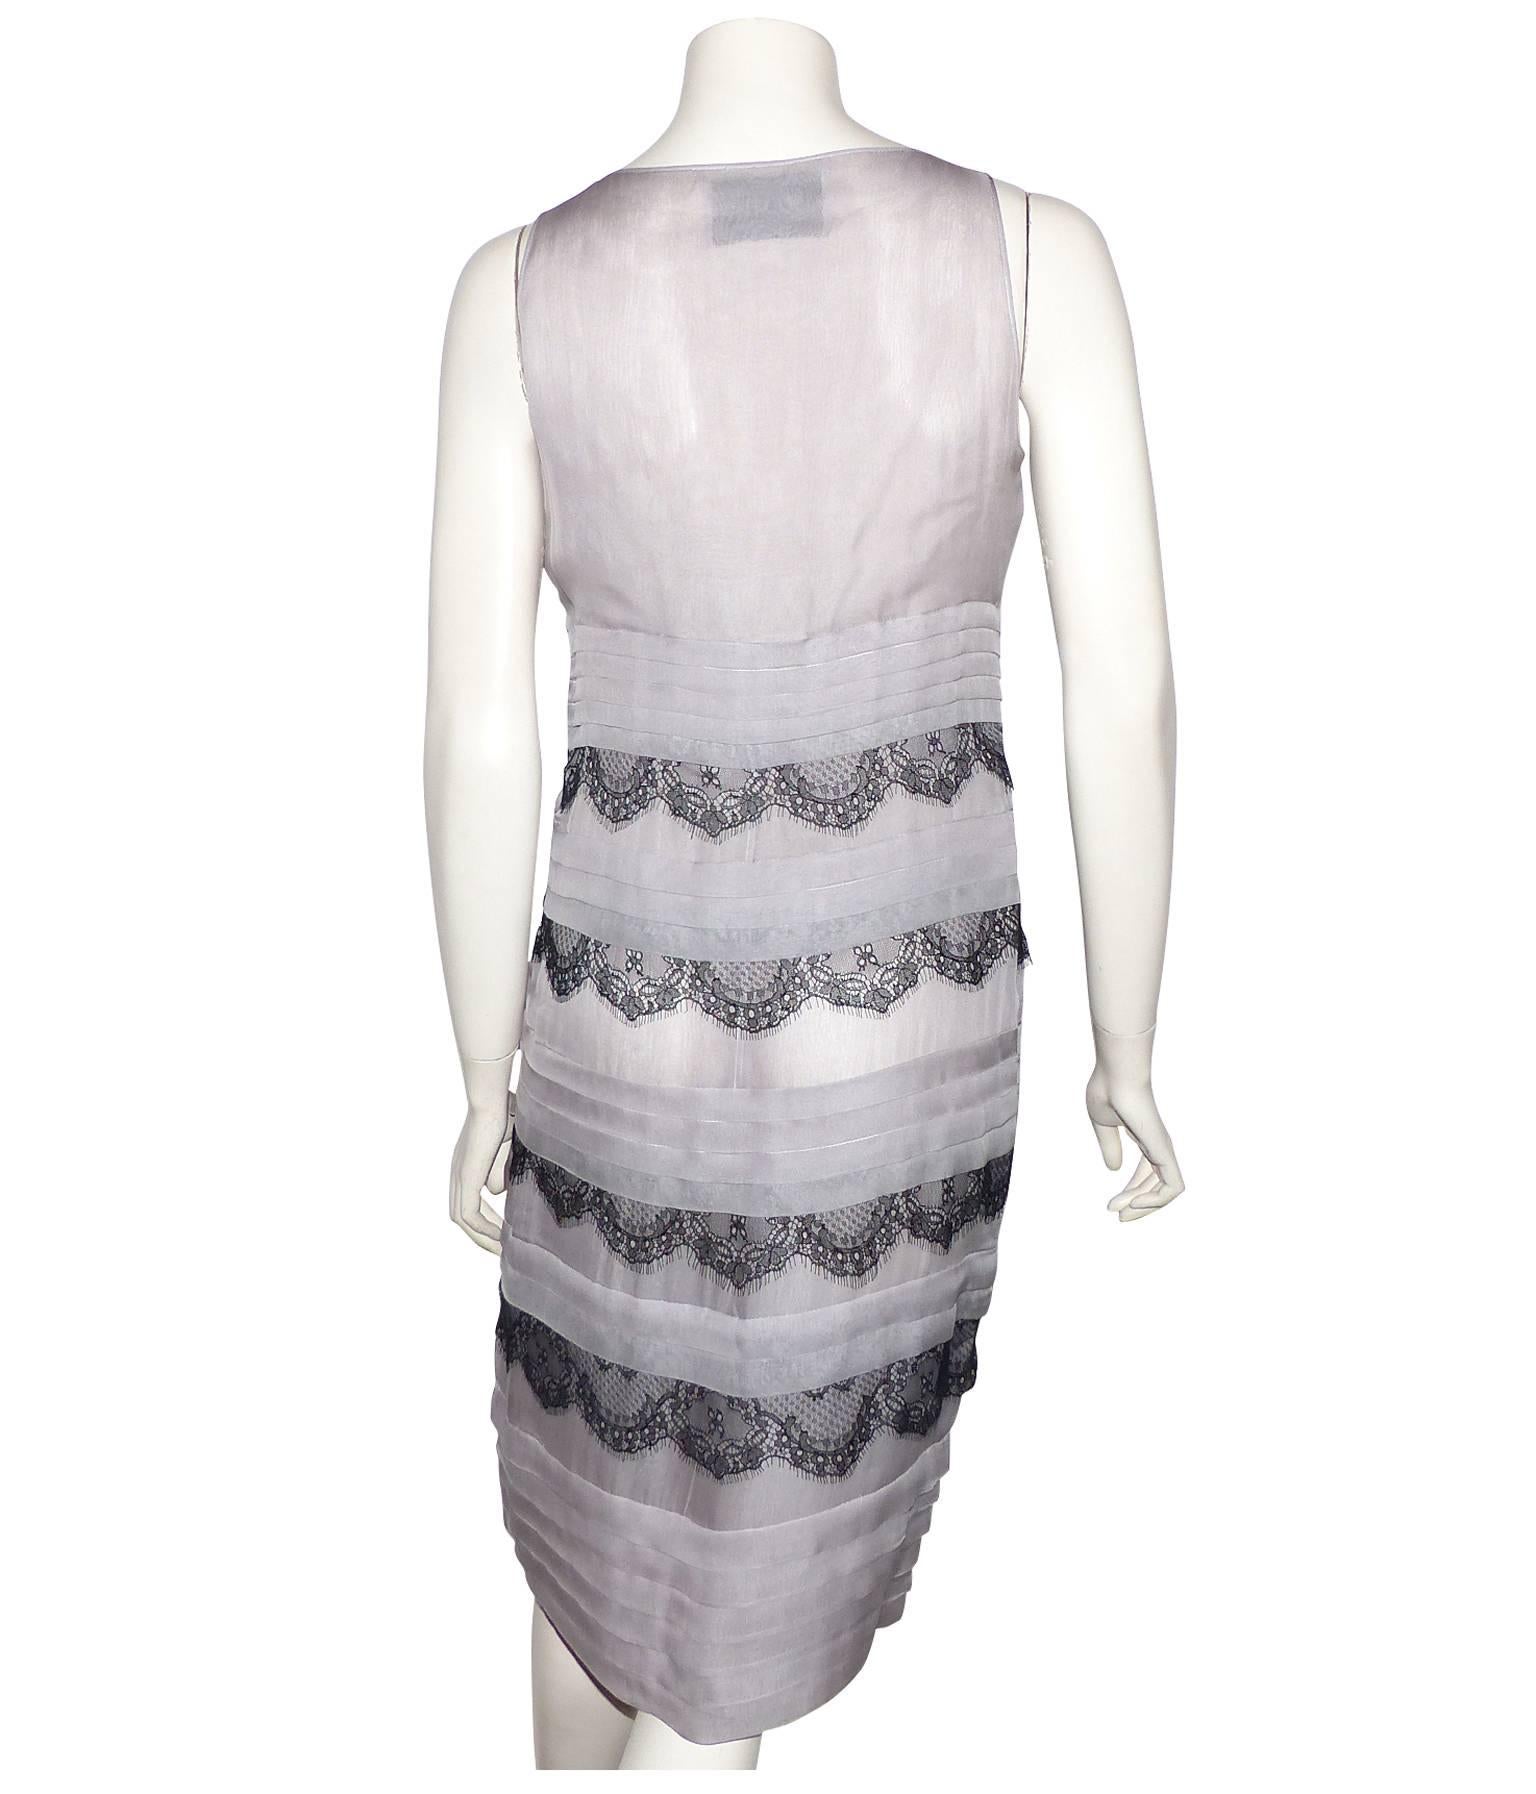 EFFET HAUTE COUTURE  Valentino Grey Silk Dress and  Black Lace  / SUBLIME  4